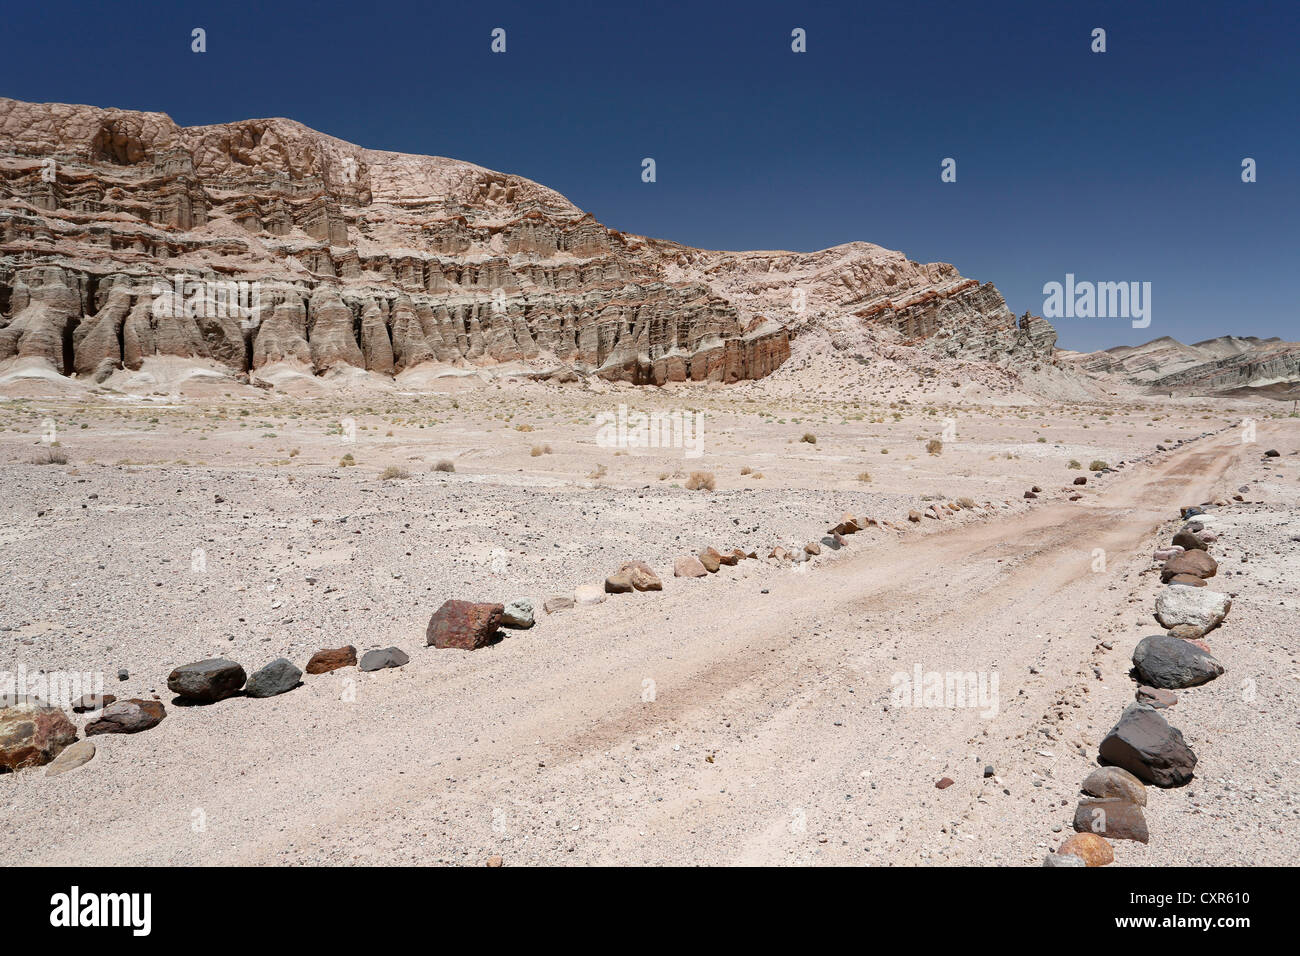 Gravel road in Red Rock Canyon State Park, southern tip of the Sierra Nevada, California, USA Stock Photo